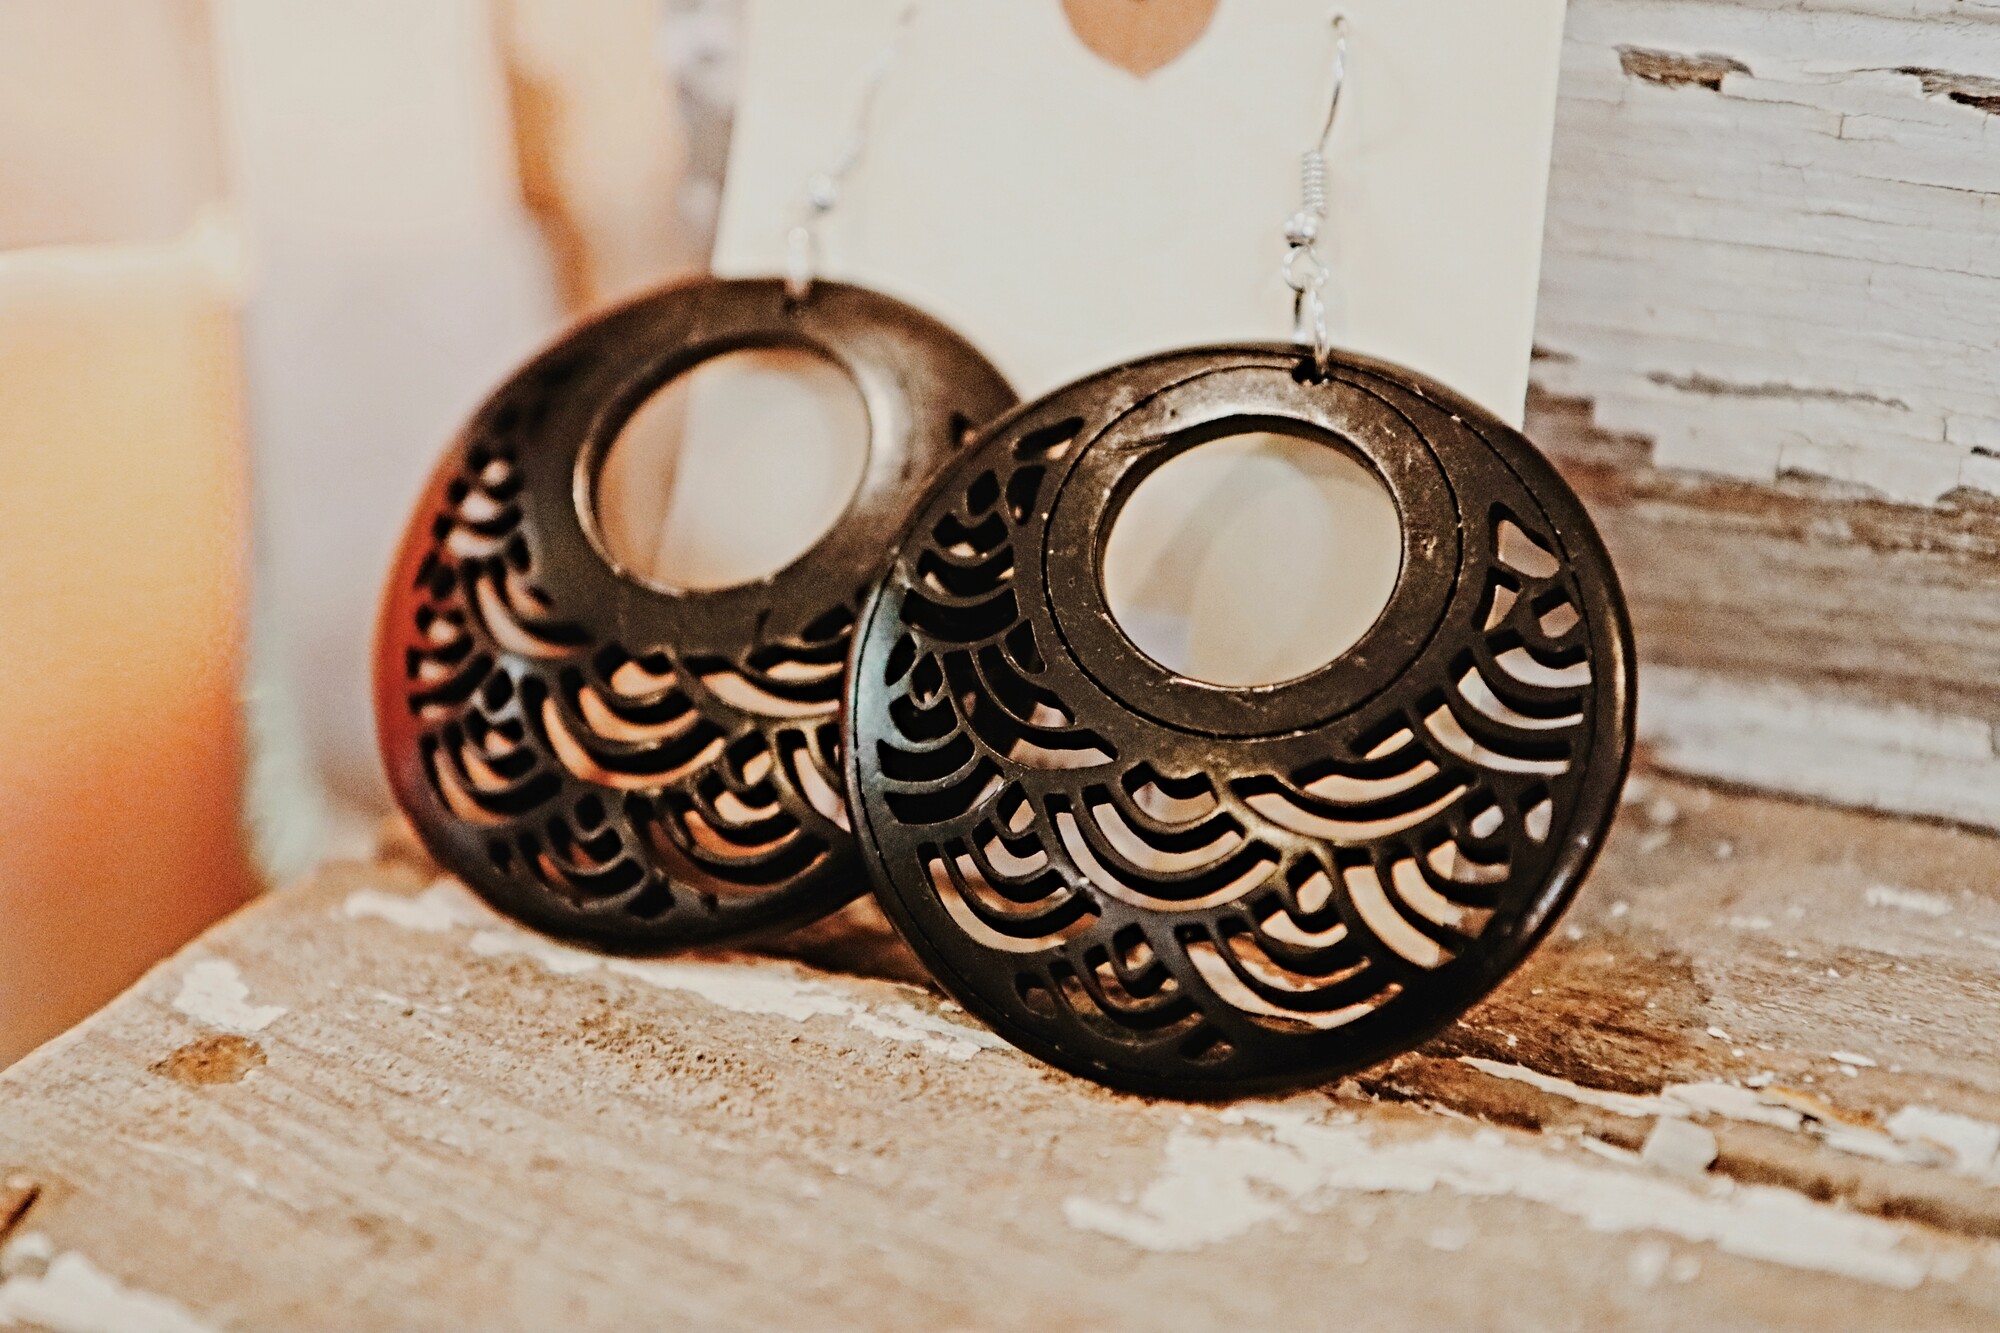 These dangling boho earrings measure 3 inches long. They are perfect to add to any outfit to take it to the next level!